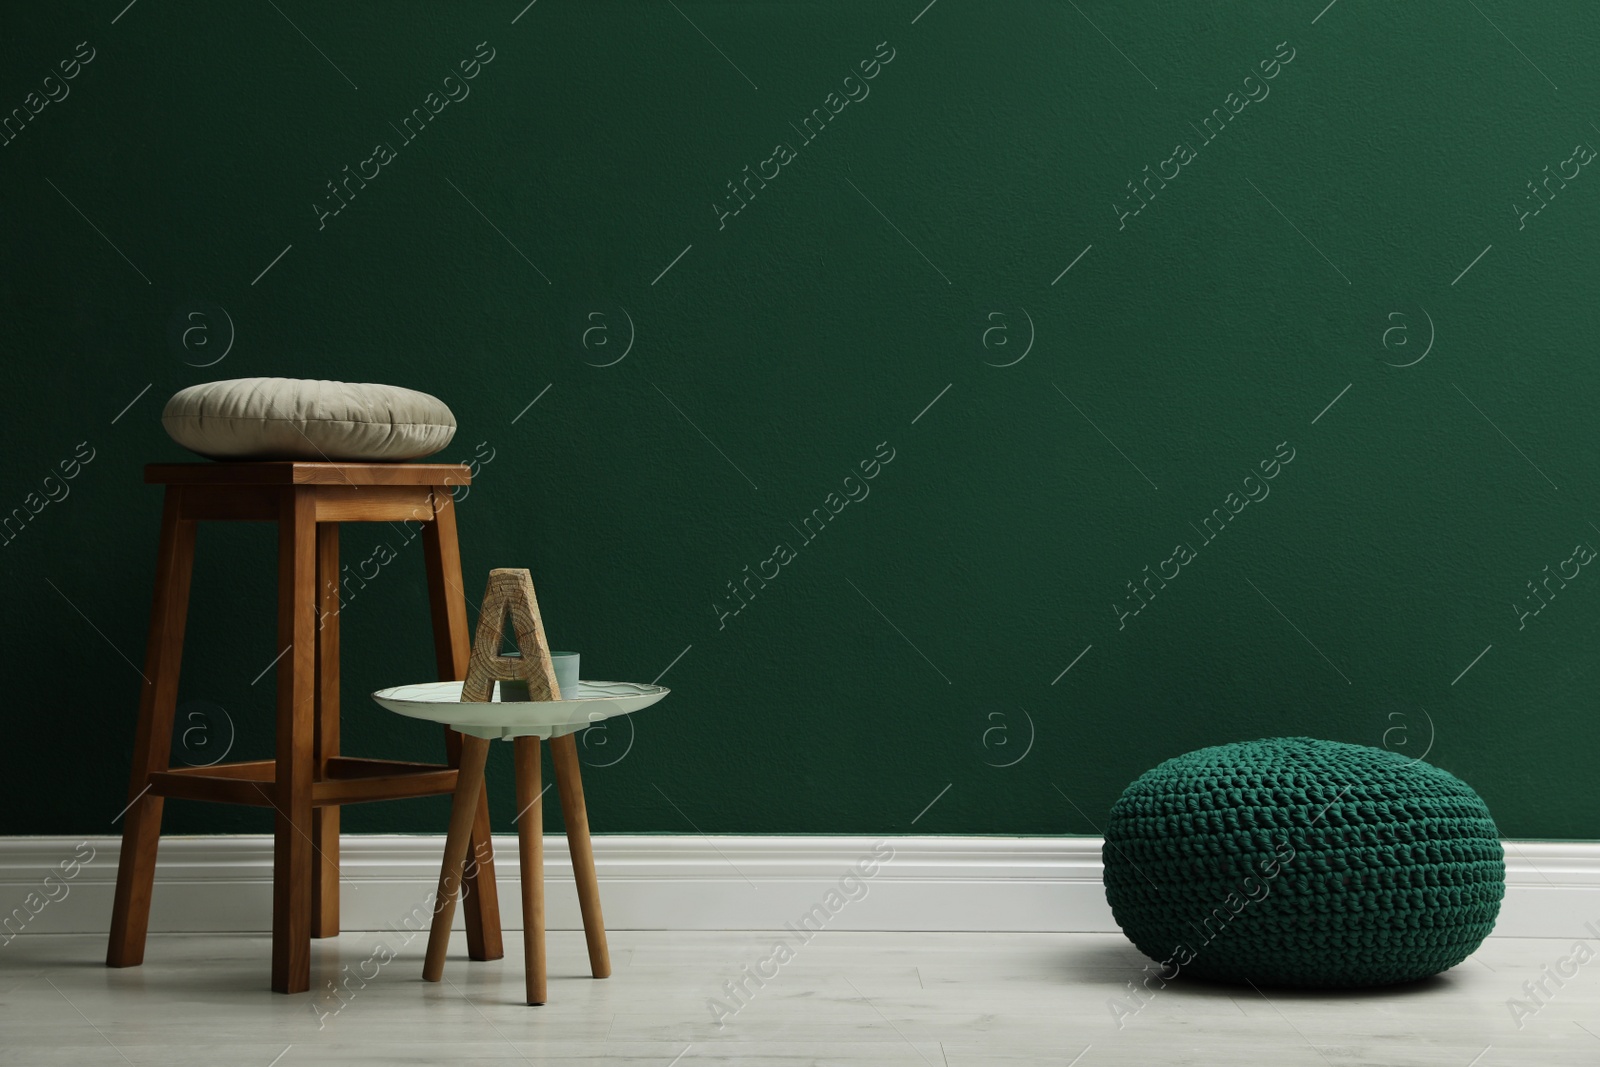 Photo of Stylish knitted pouf and wooden stool near green wall indoors, space for text